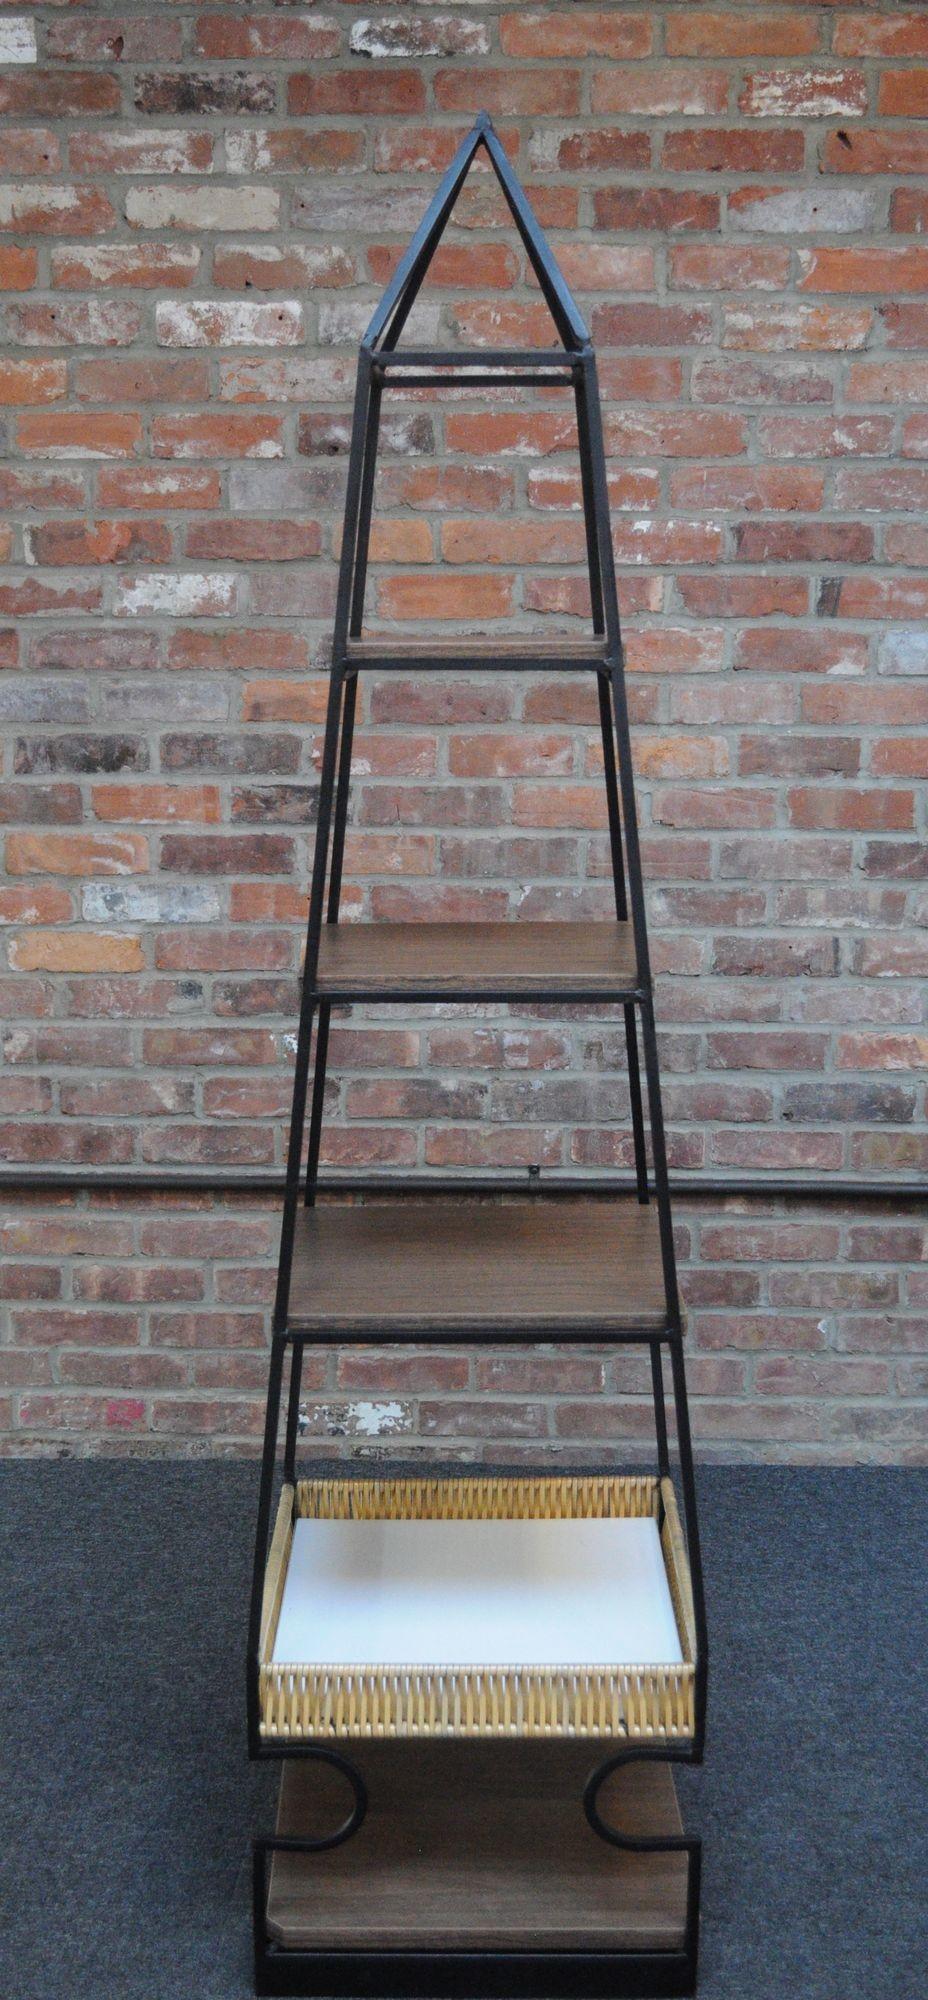 Scarcely seen sculptural wrought iron shelving unit designed by Arthur Umanoff for Shaver Howard.
Unique, graceful pyramid/obelisk-form with four rectangular shelves in faux wood grain laminated pressboard and a rattan basket. Shelves are mounted by